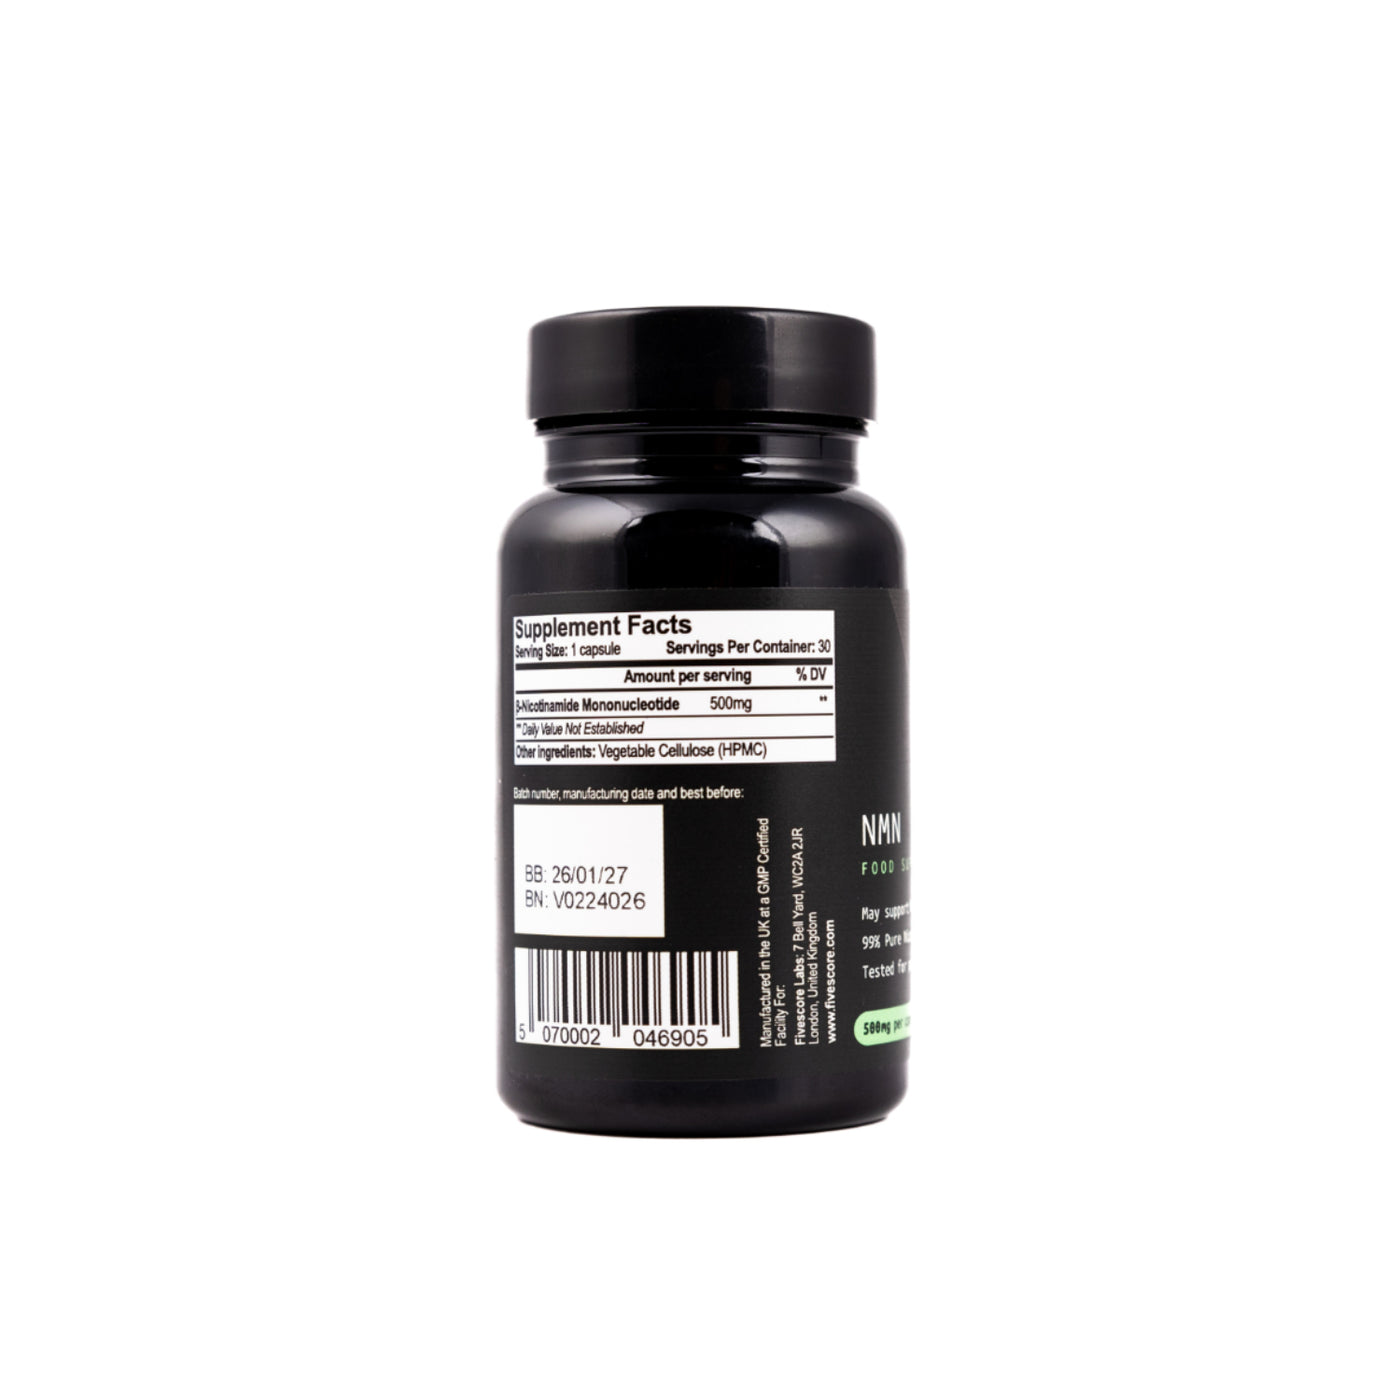 Ultra-High Purity β-NMN – 99% Pure (3rd Party Lab Tested)